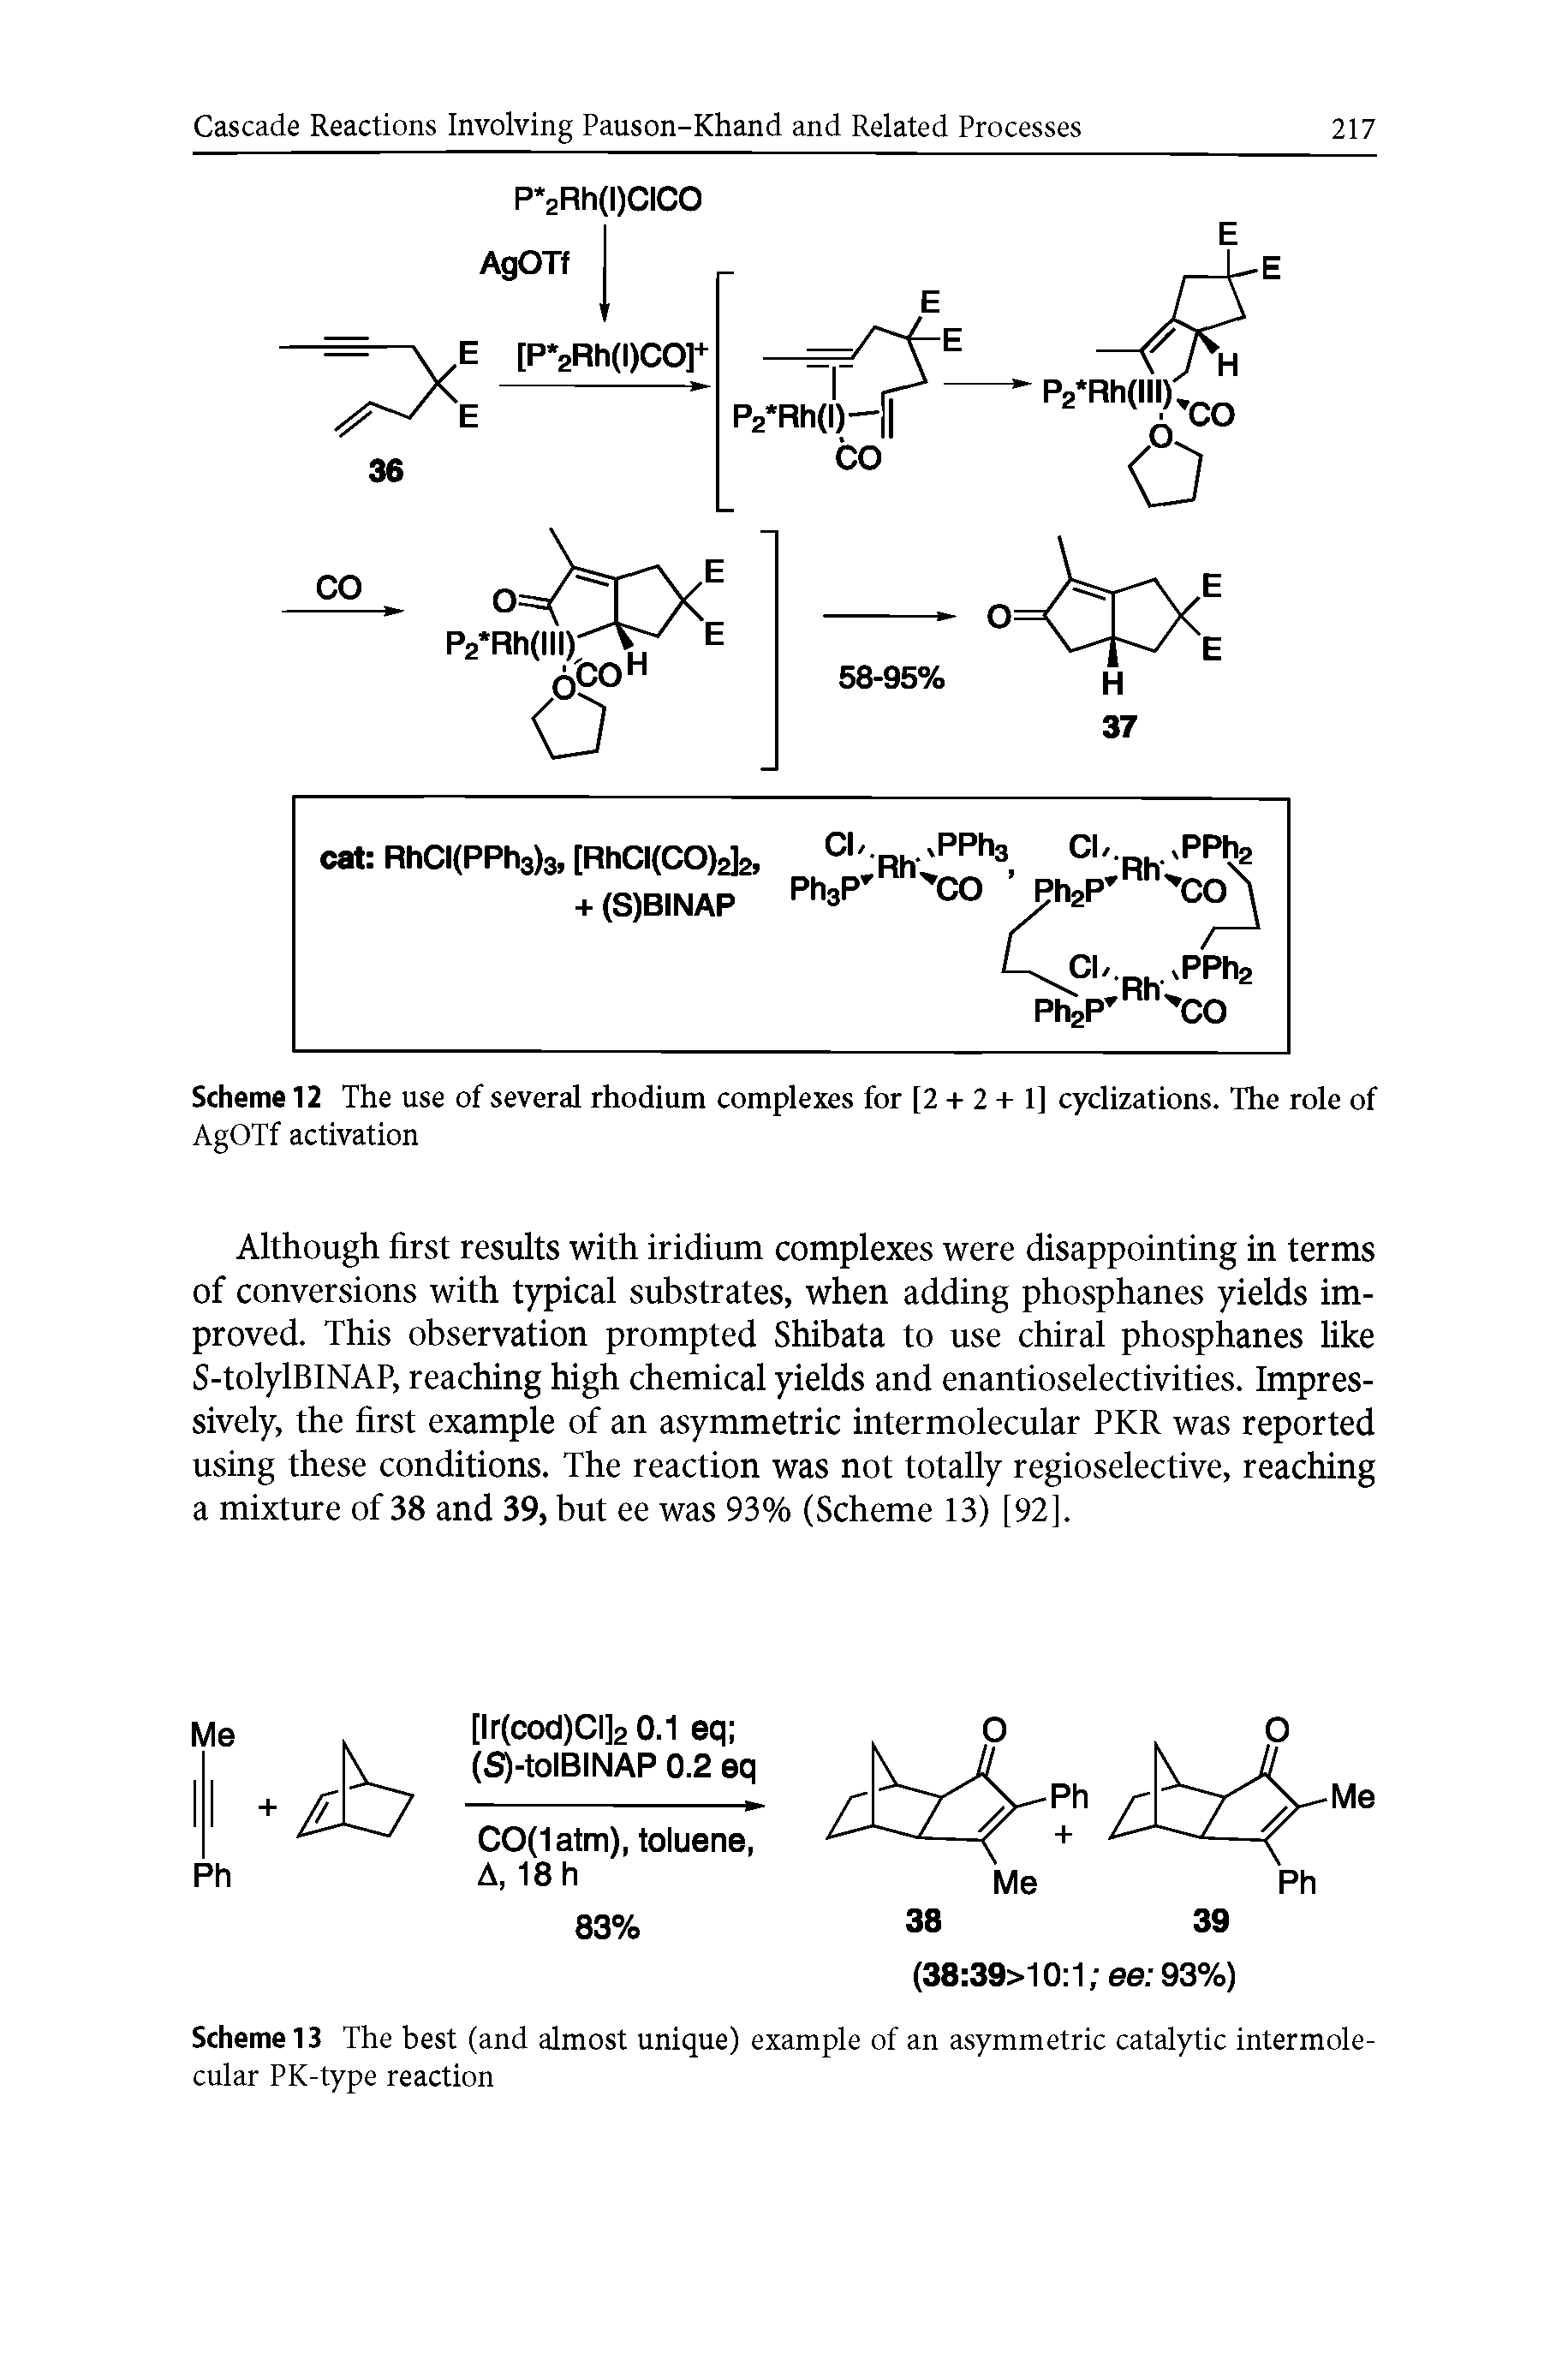 Scheme 13 The best (and almost unique) example of an asymmetric catalytic intermolecular PK-type reaction...